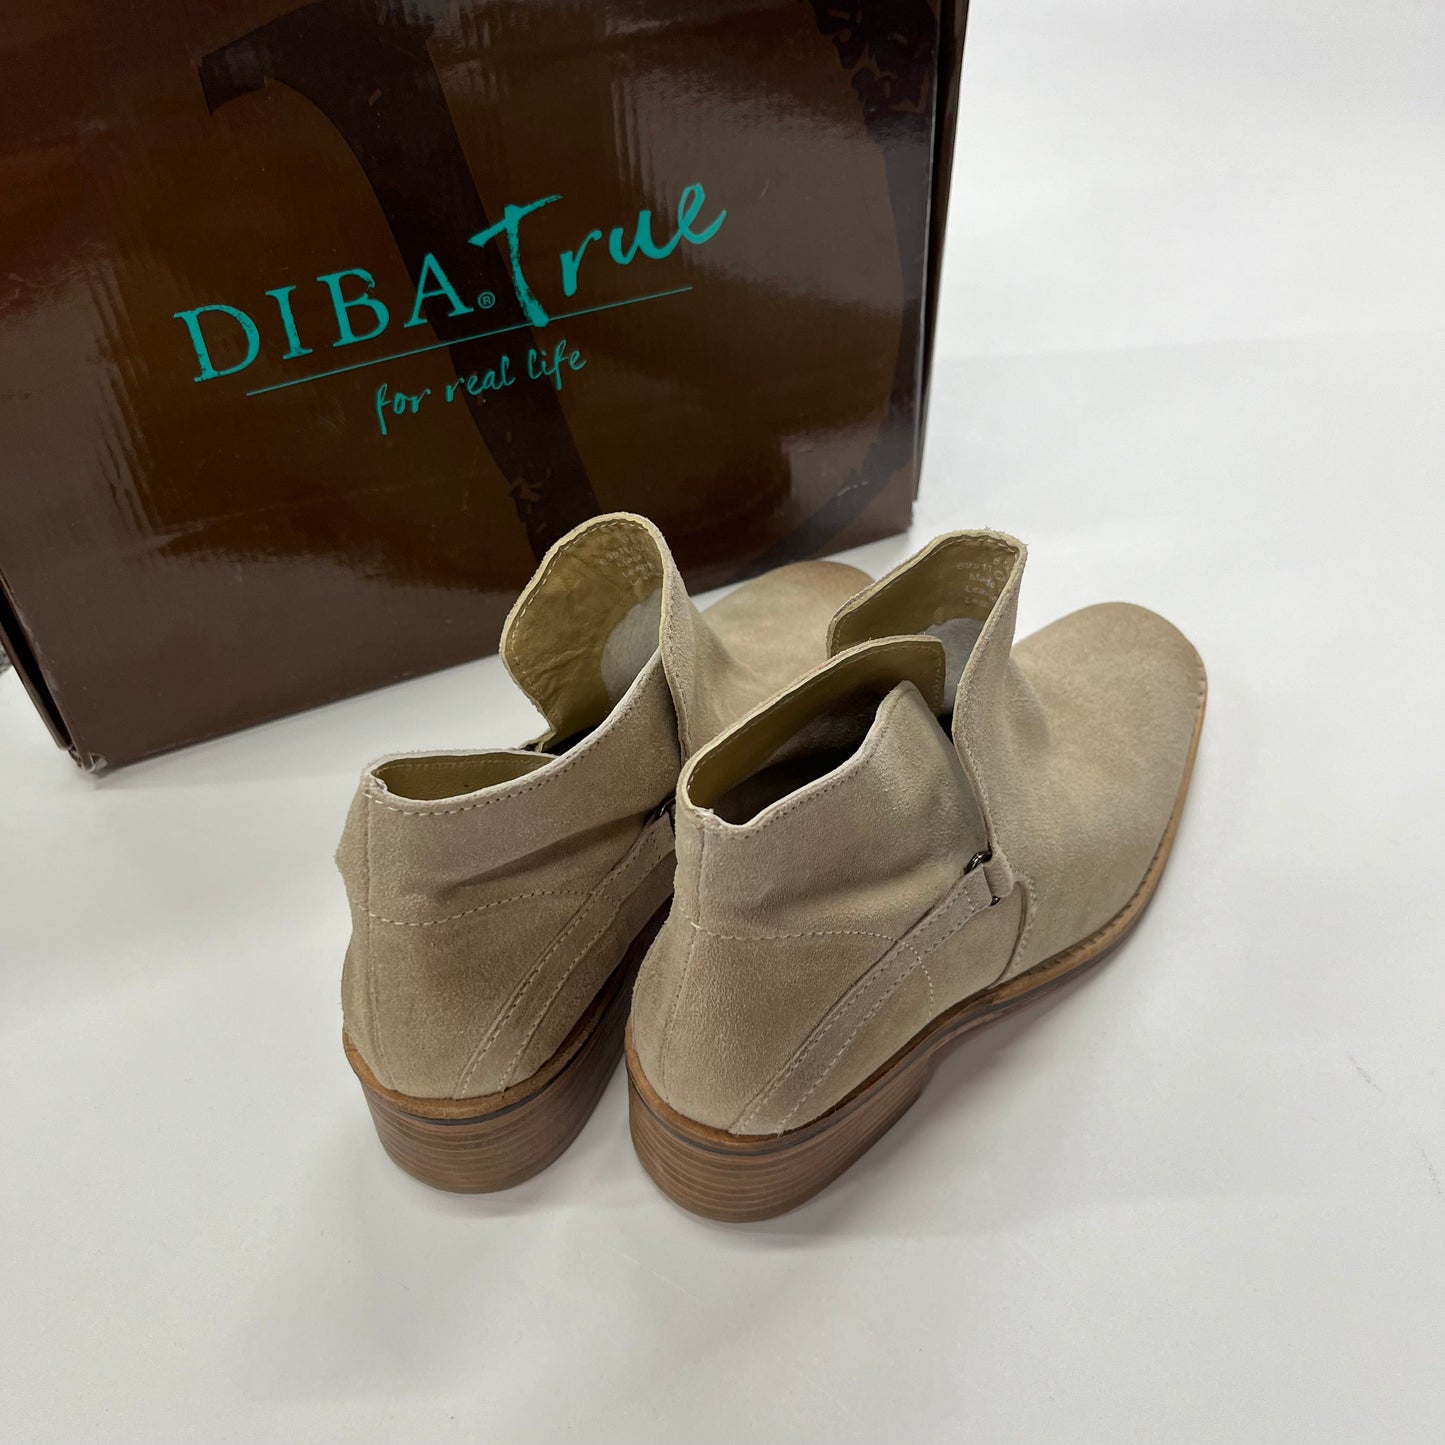 Boots Ankle Heels By Diba  Size: 6.5